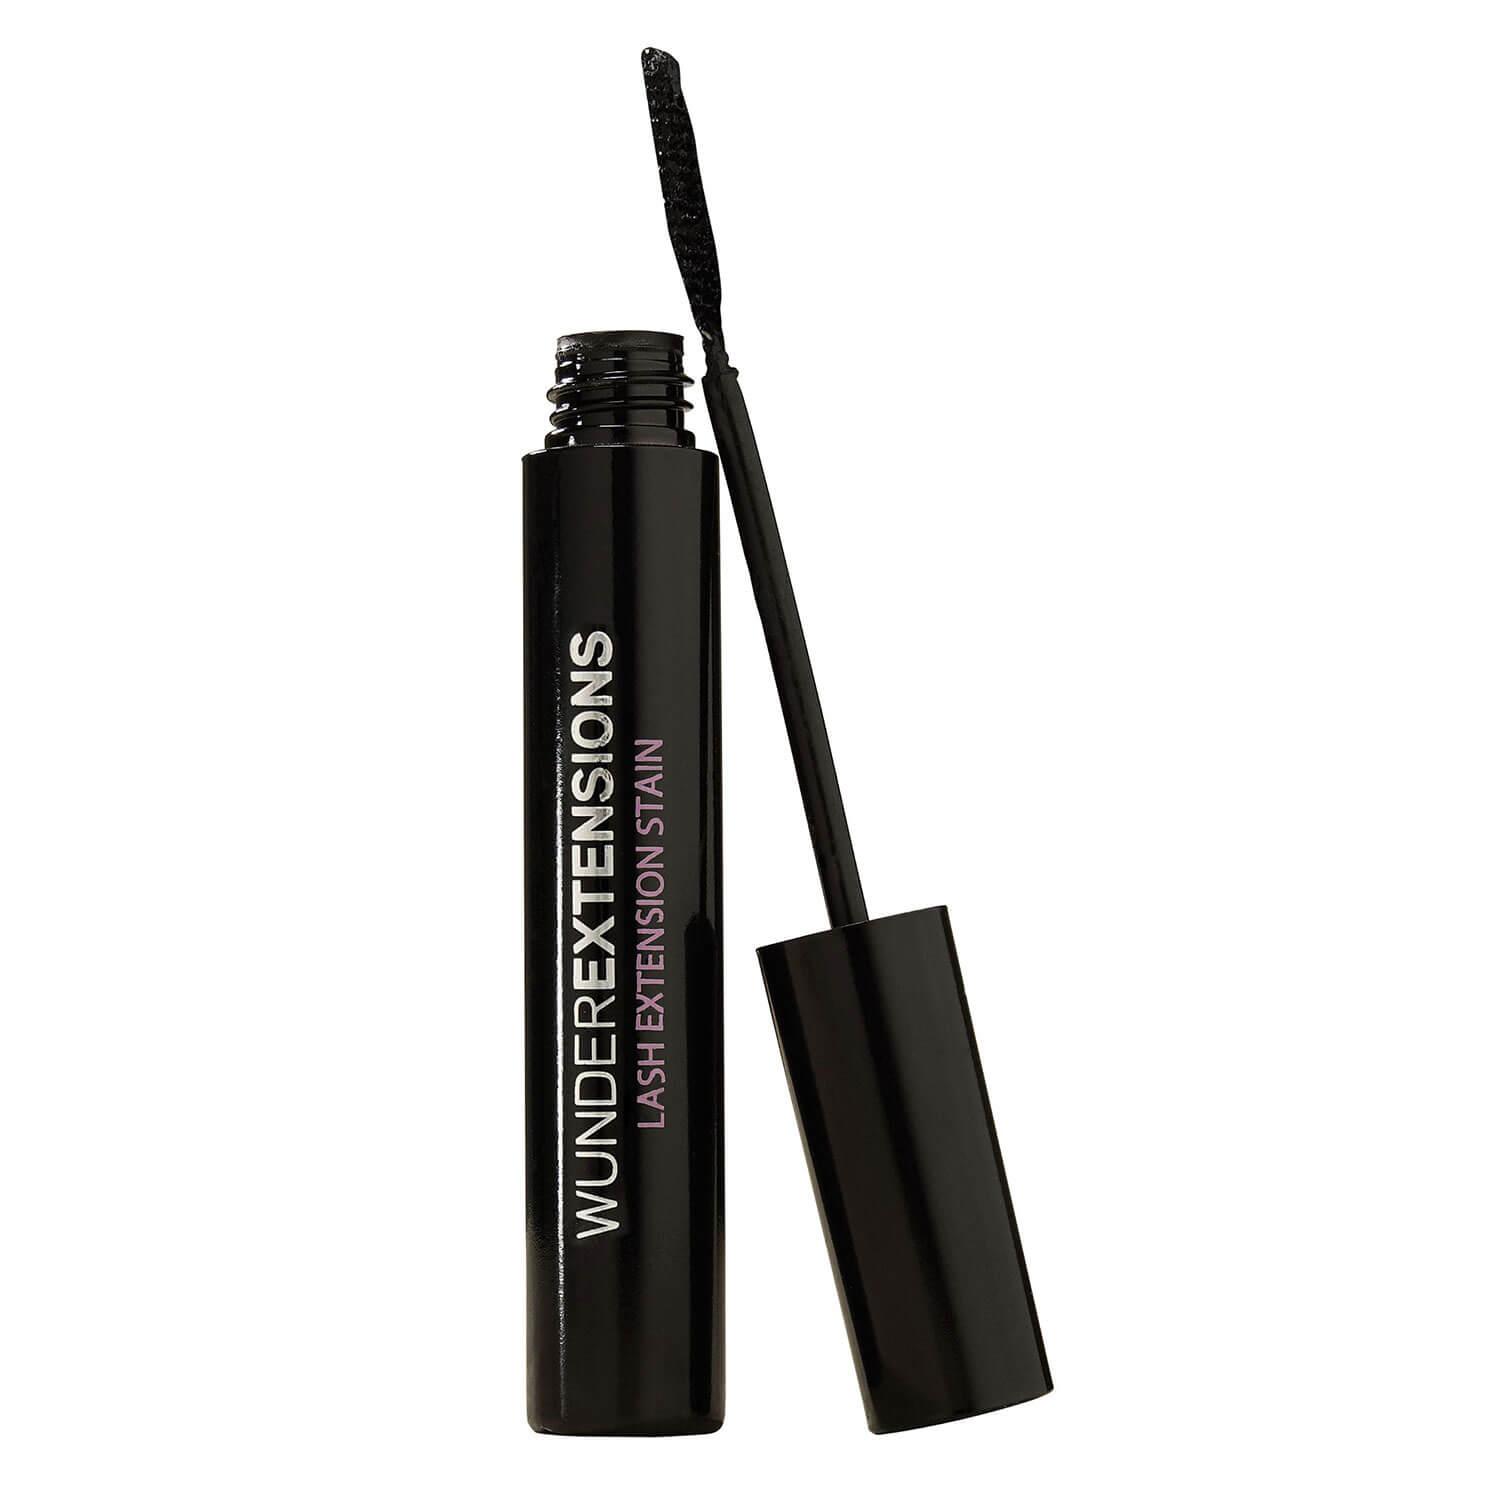 WUNDEREXTENSIONS - Lash Extension Stain Mascara Black